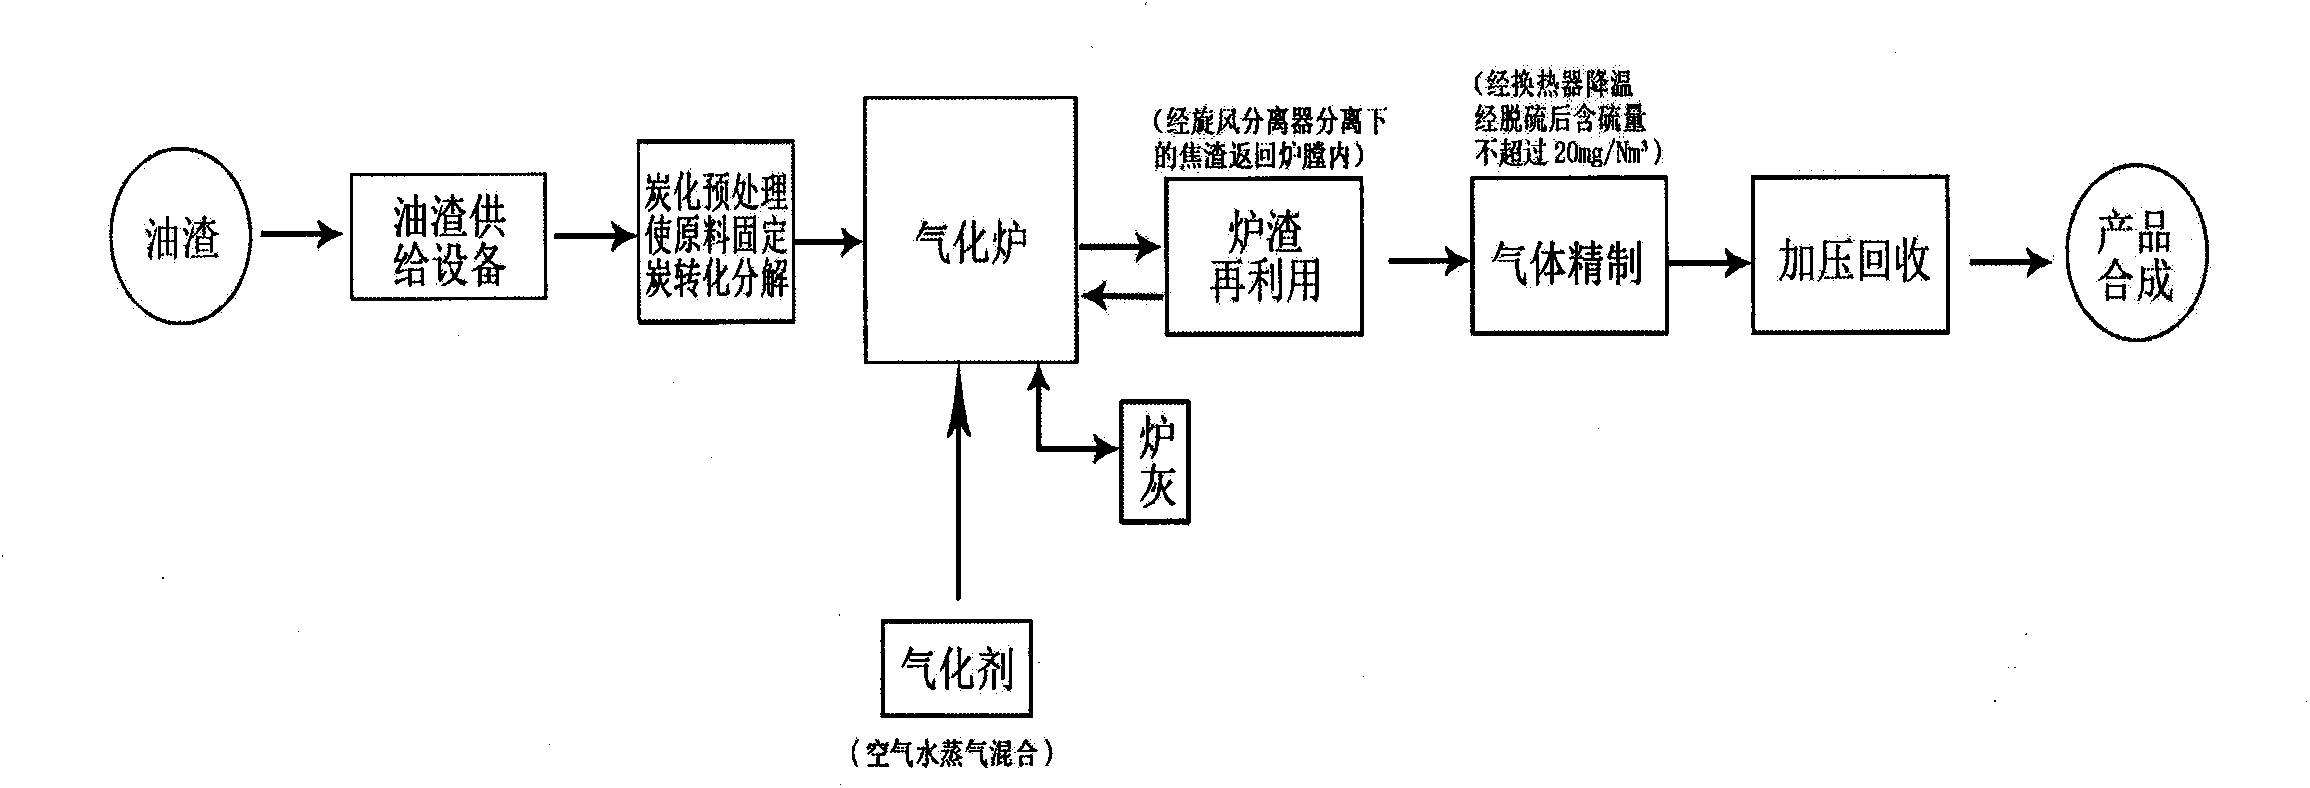 Secondary gasification treatment method for oil residue caused in gas production